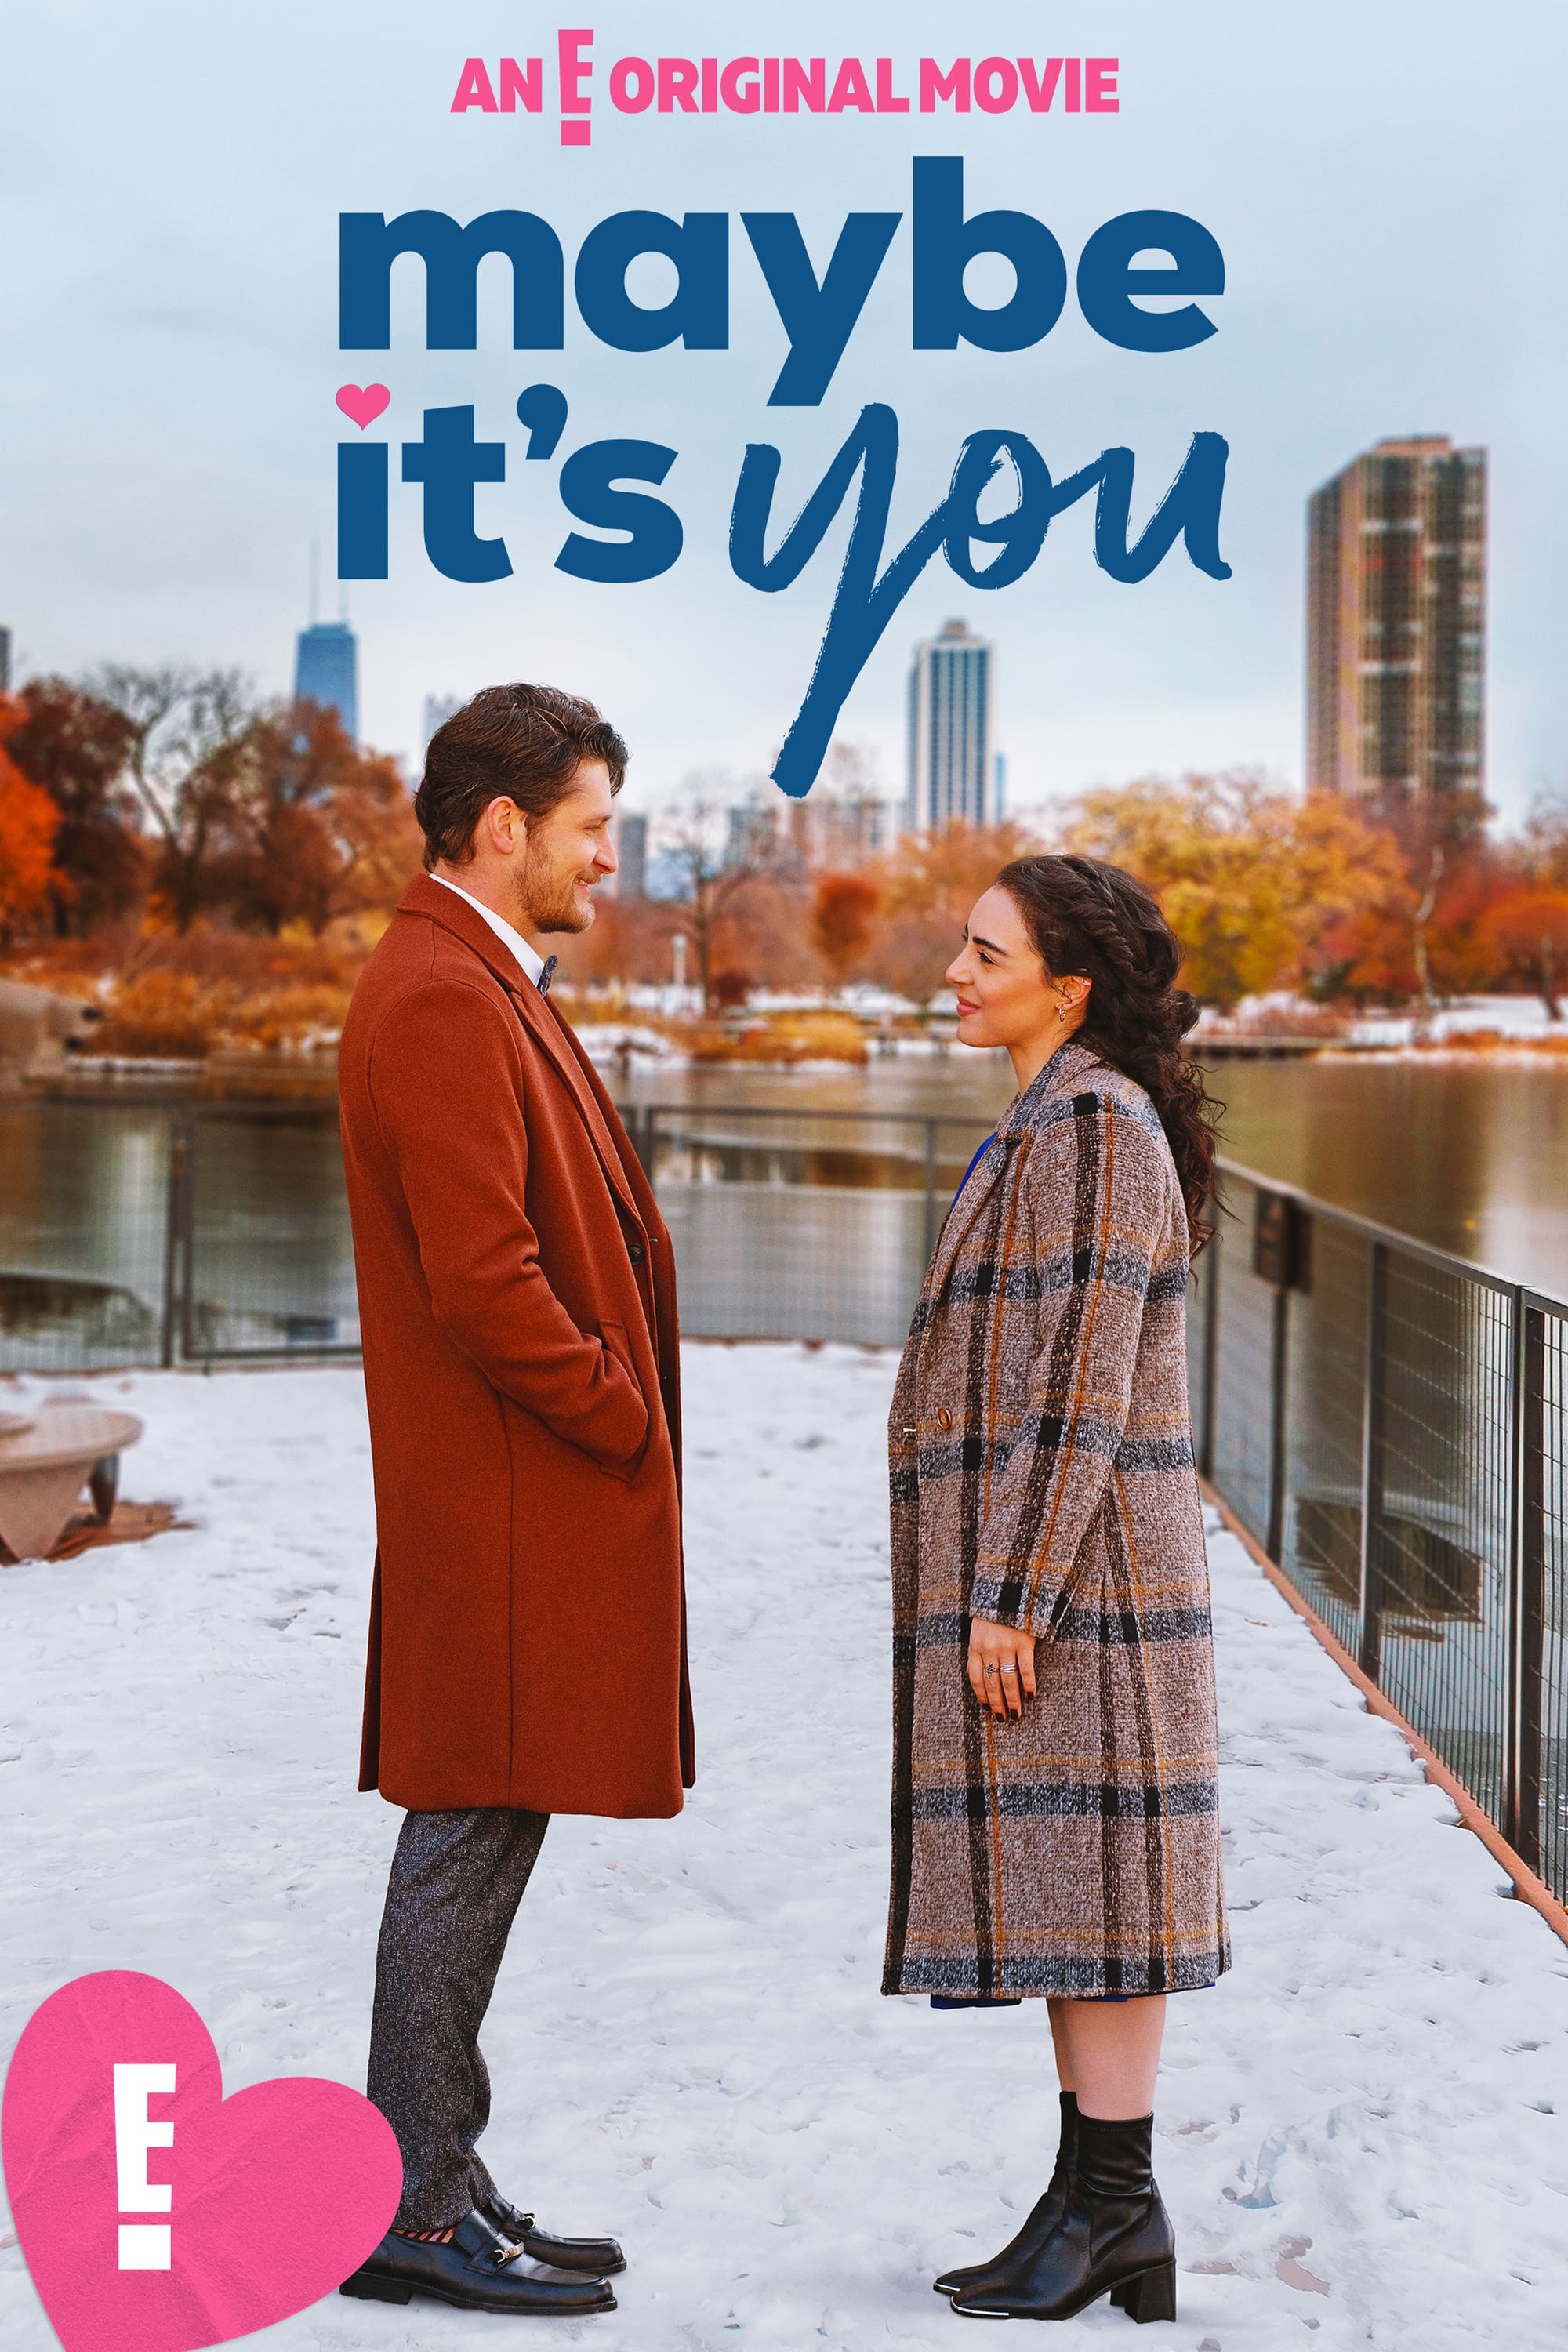 [WATCH 50+] Maybe It's You (2023) FULL MOVIE ONLINE FREE ENGLISH/Dub/SUB Comedy STREAMINGS ������������ Movie Poster